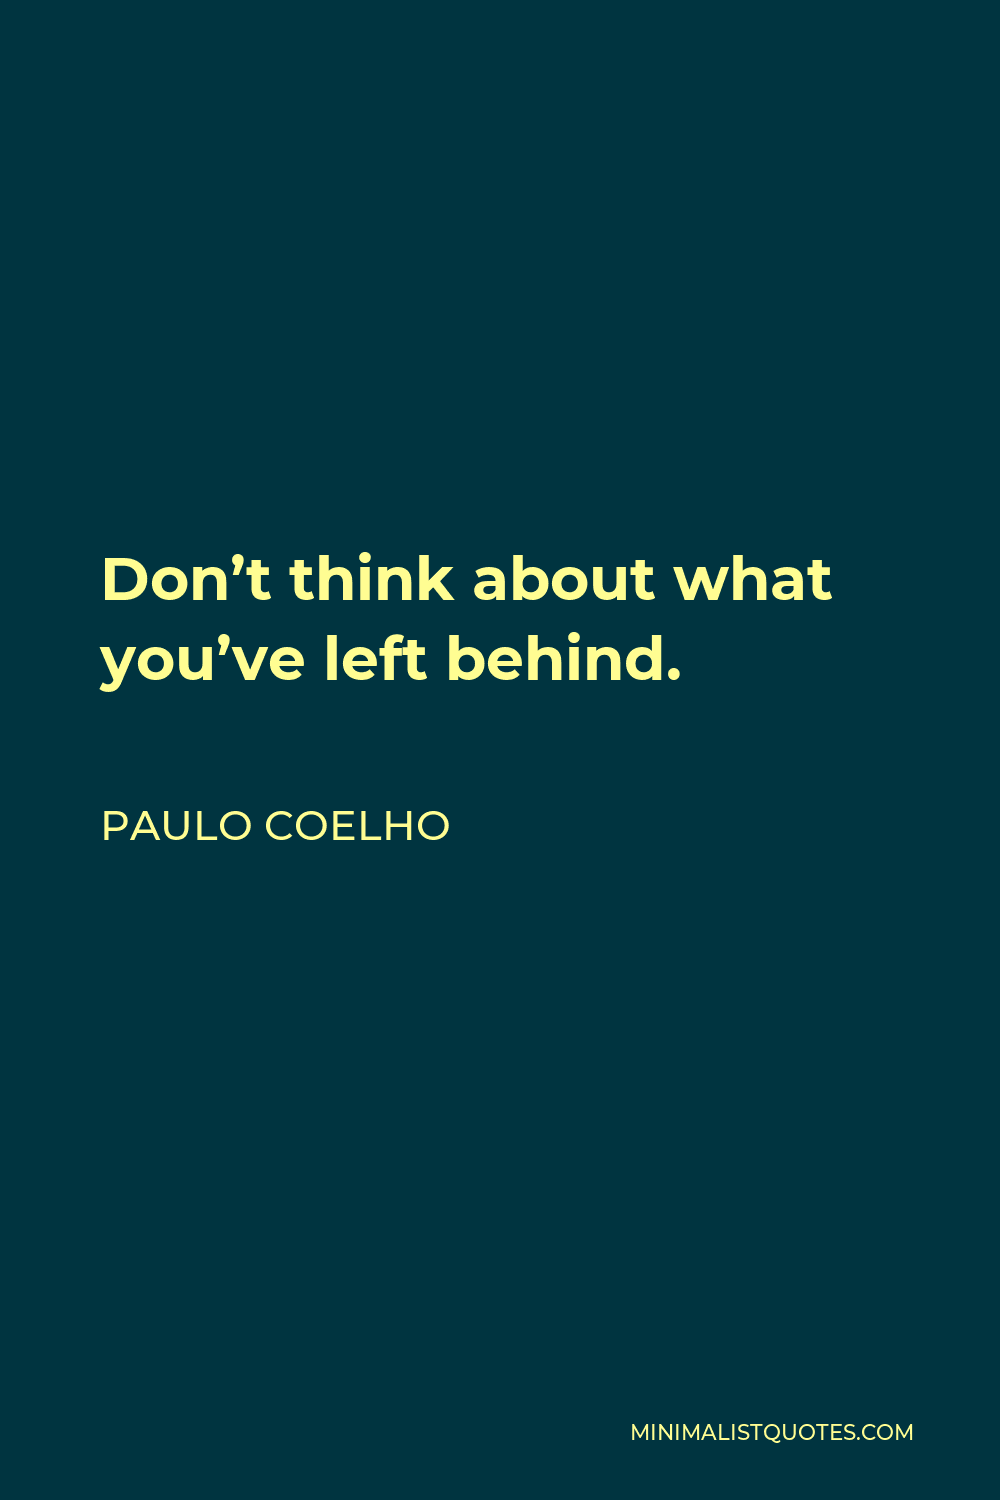 Paulo Coelho Quote - Don’t think about what you’ve left behind.